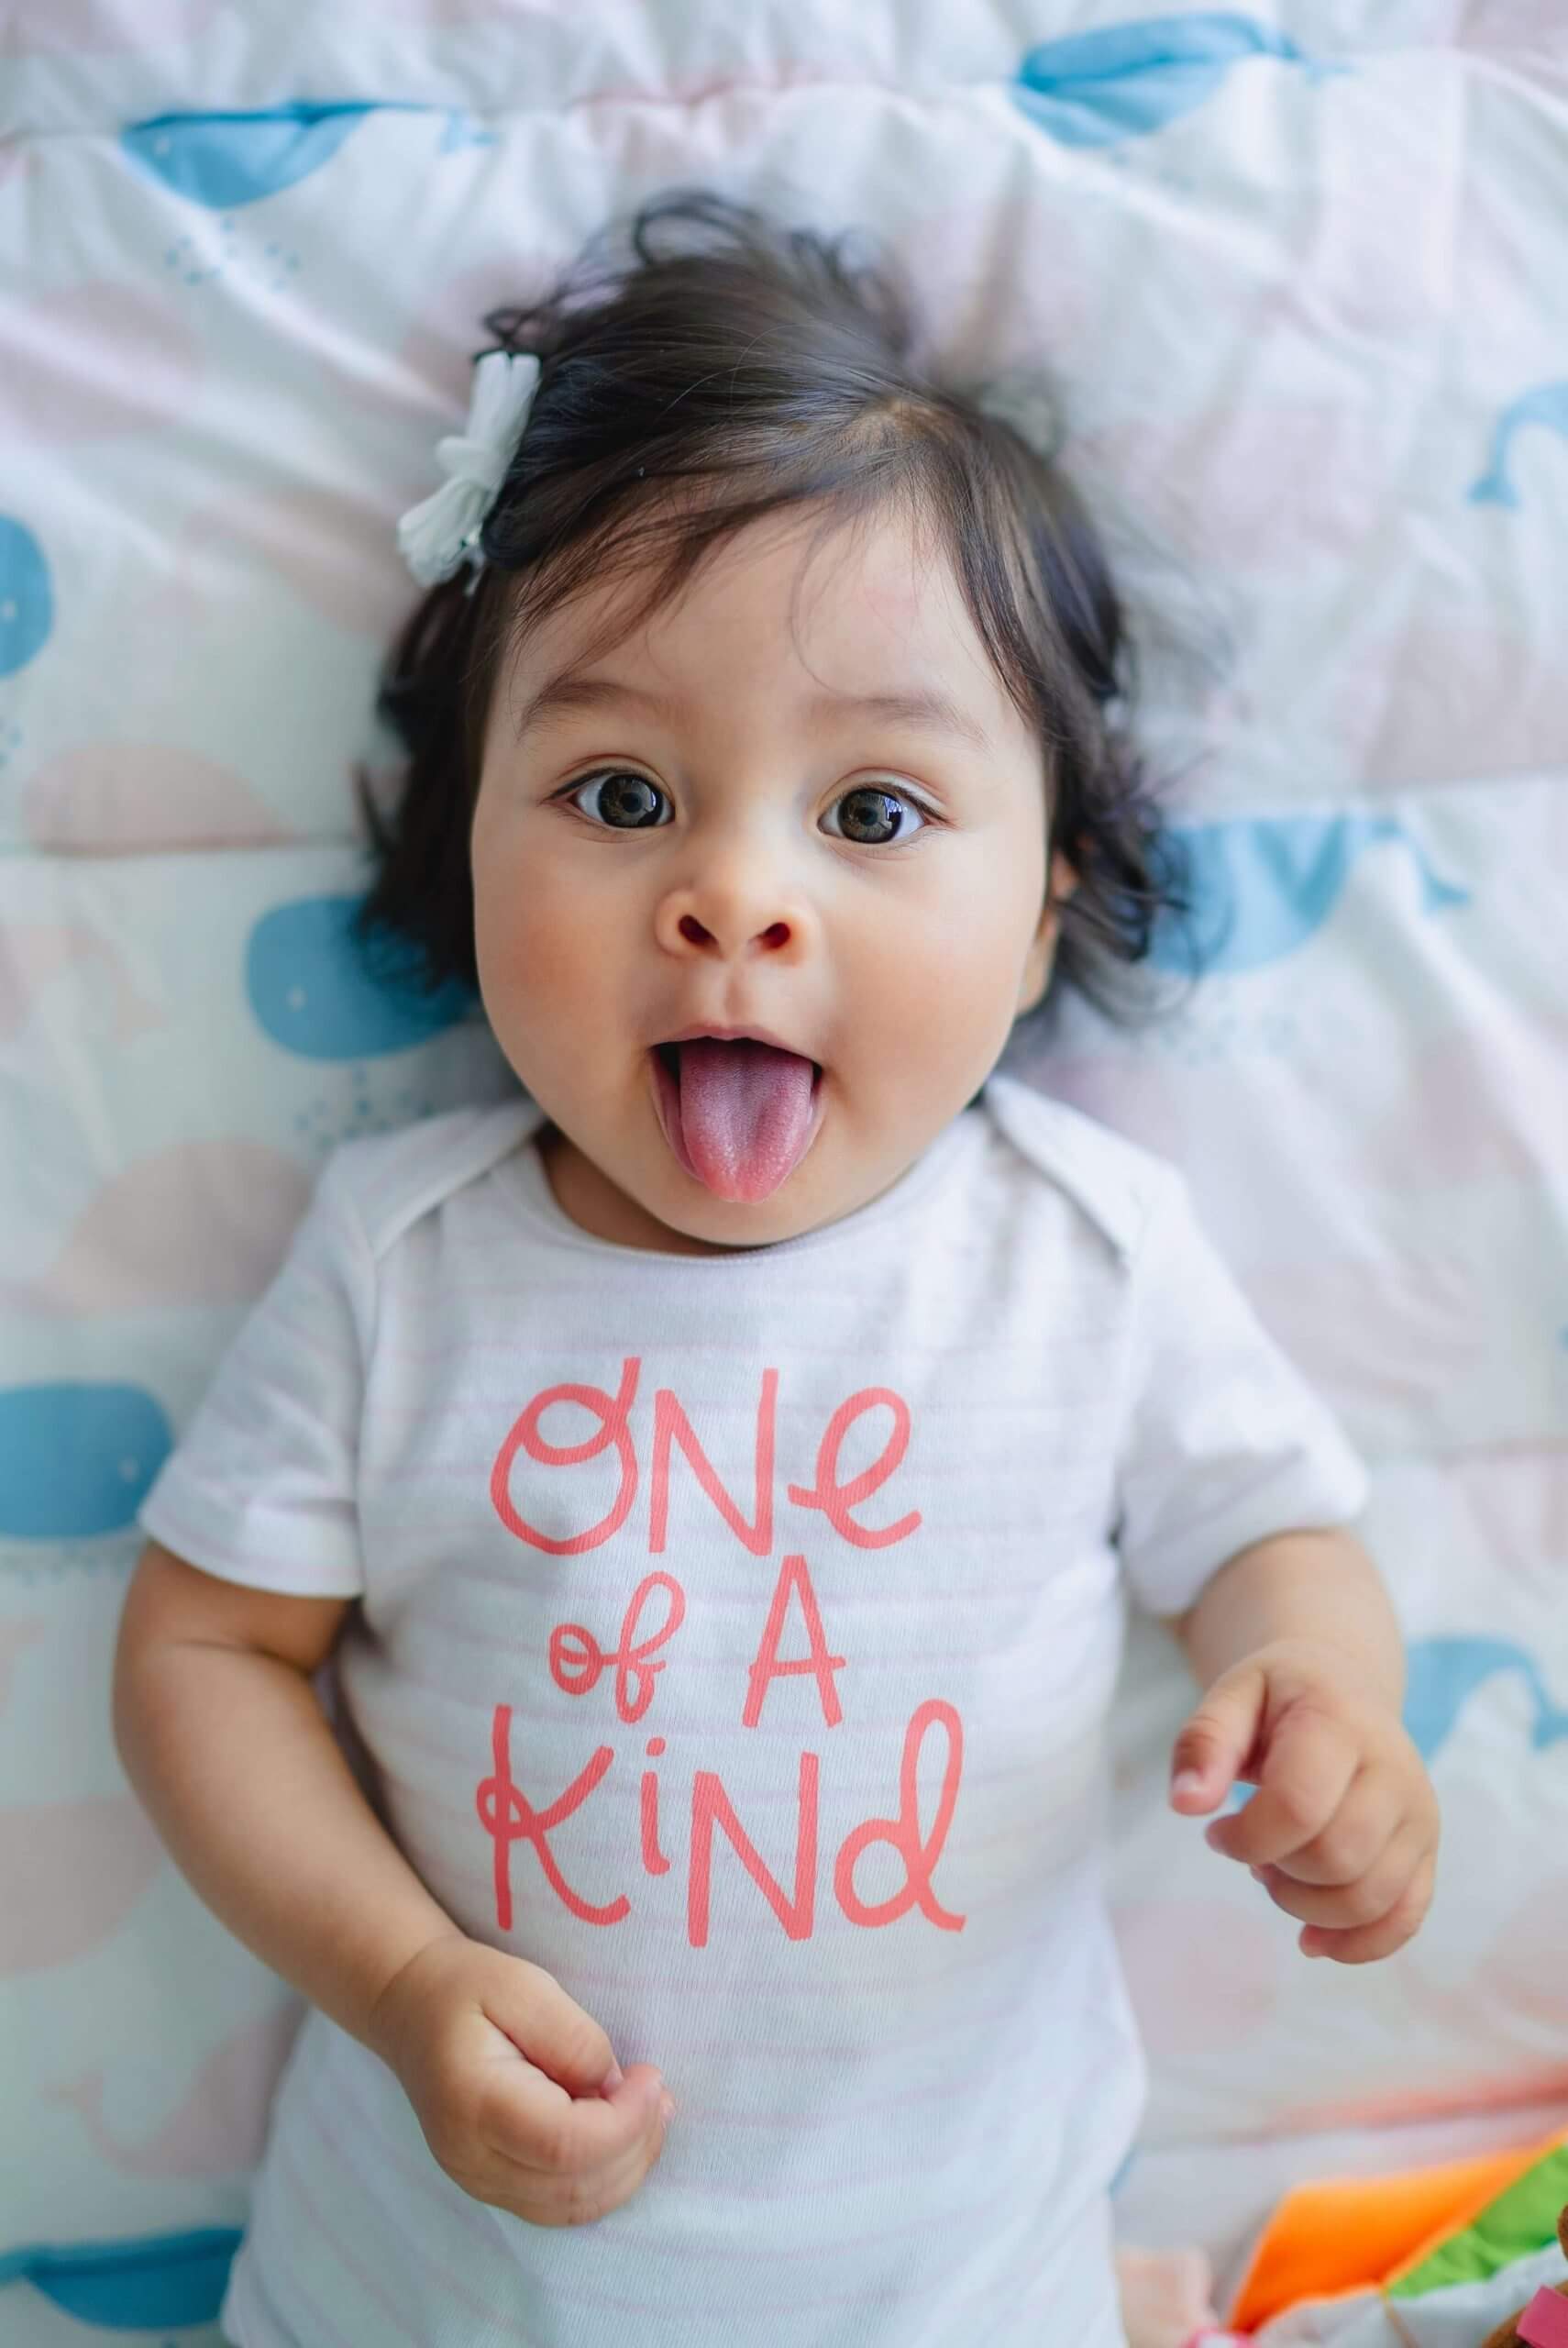 Baby with one of a kind T-shirt